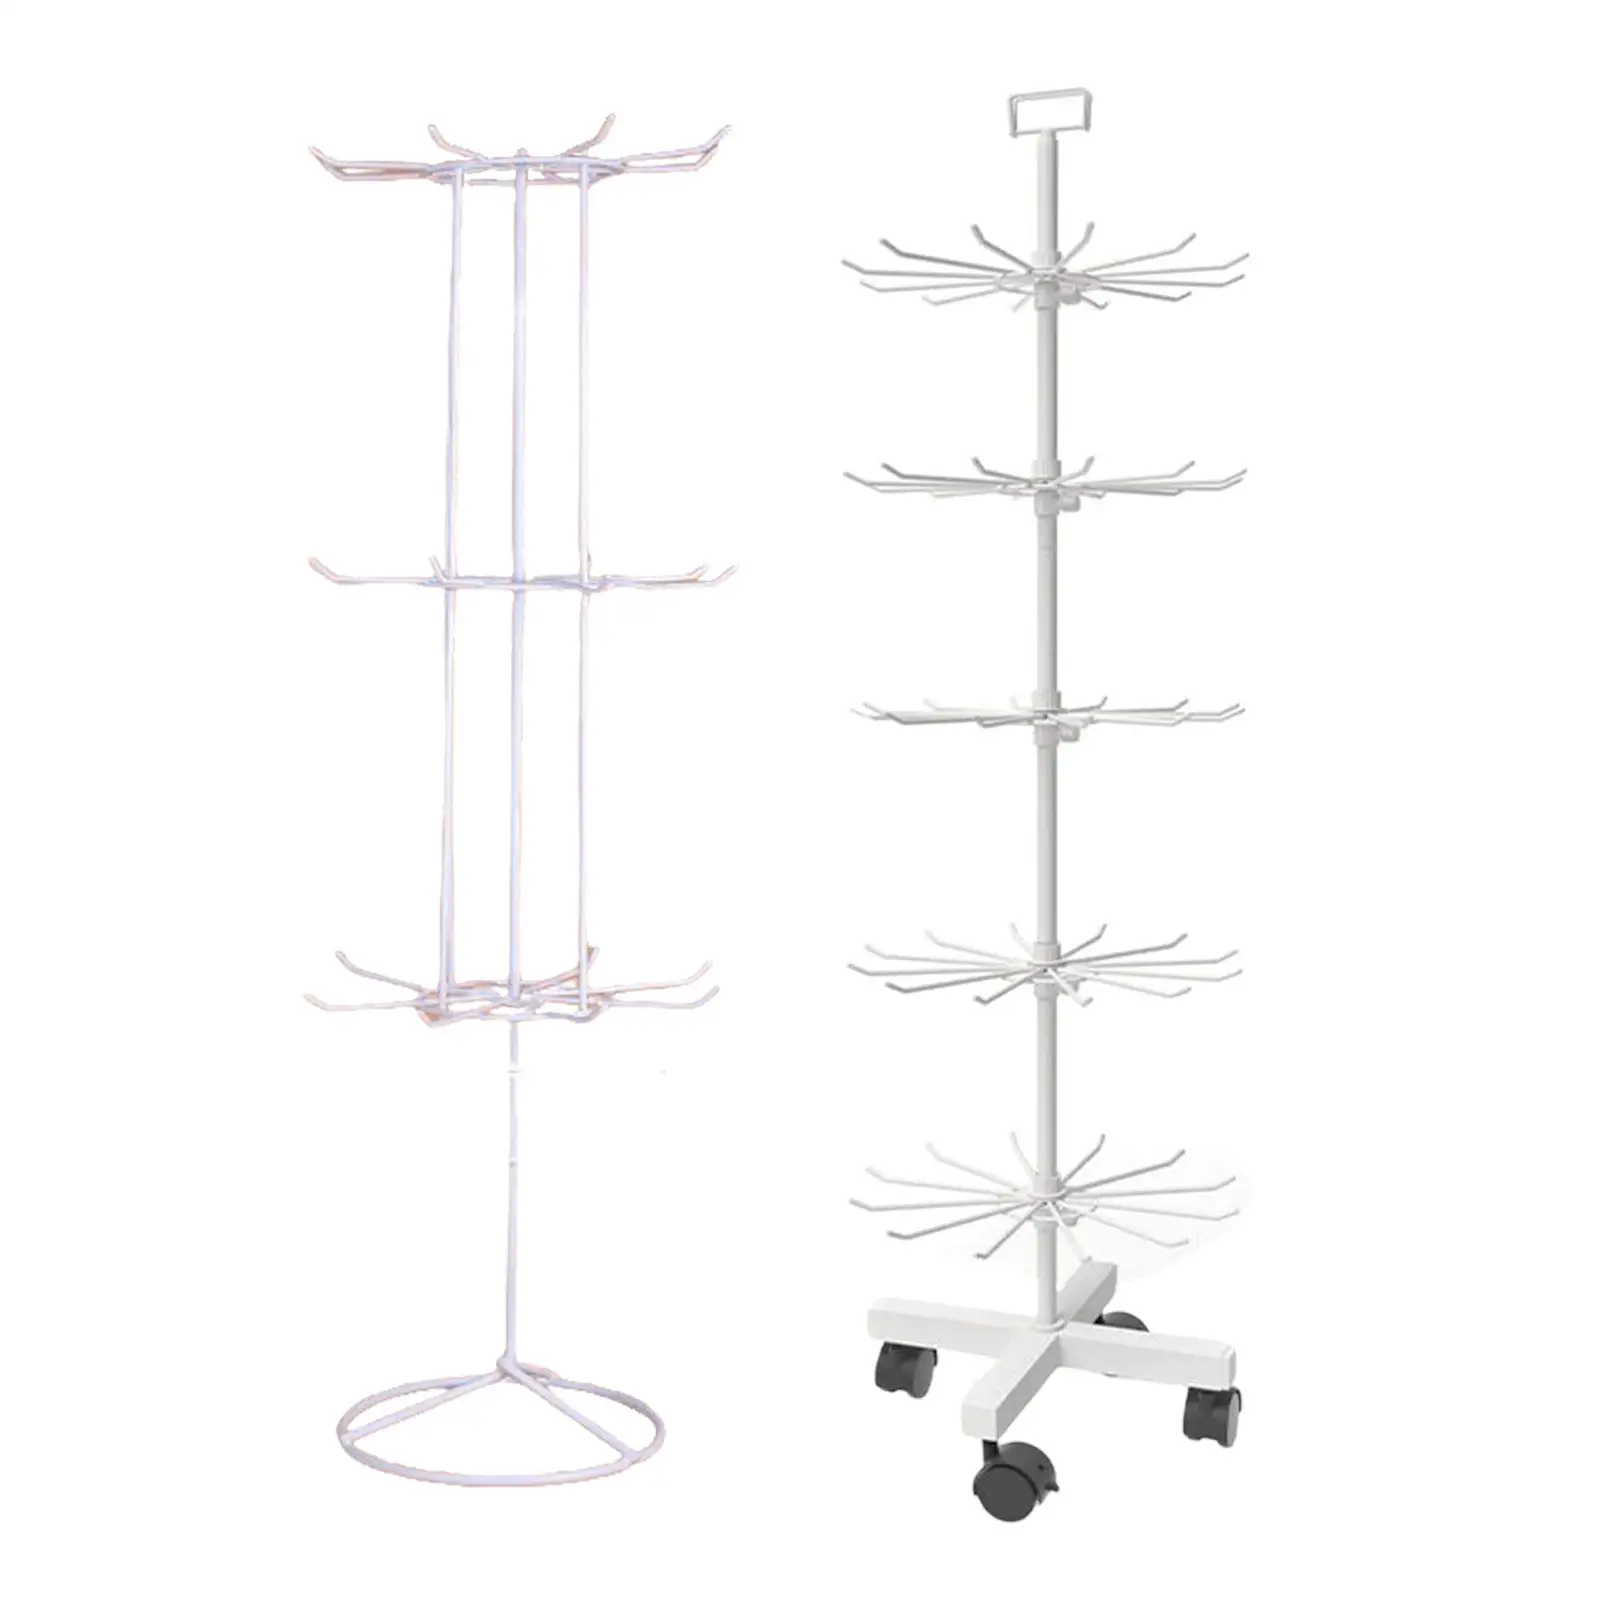 Multiple Tier Jewelry Organizer Large Capacity Storage Holder Gift Display Stand for Brushes Necklace Watch Earrings Hair Band